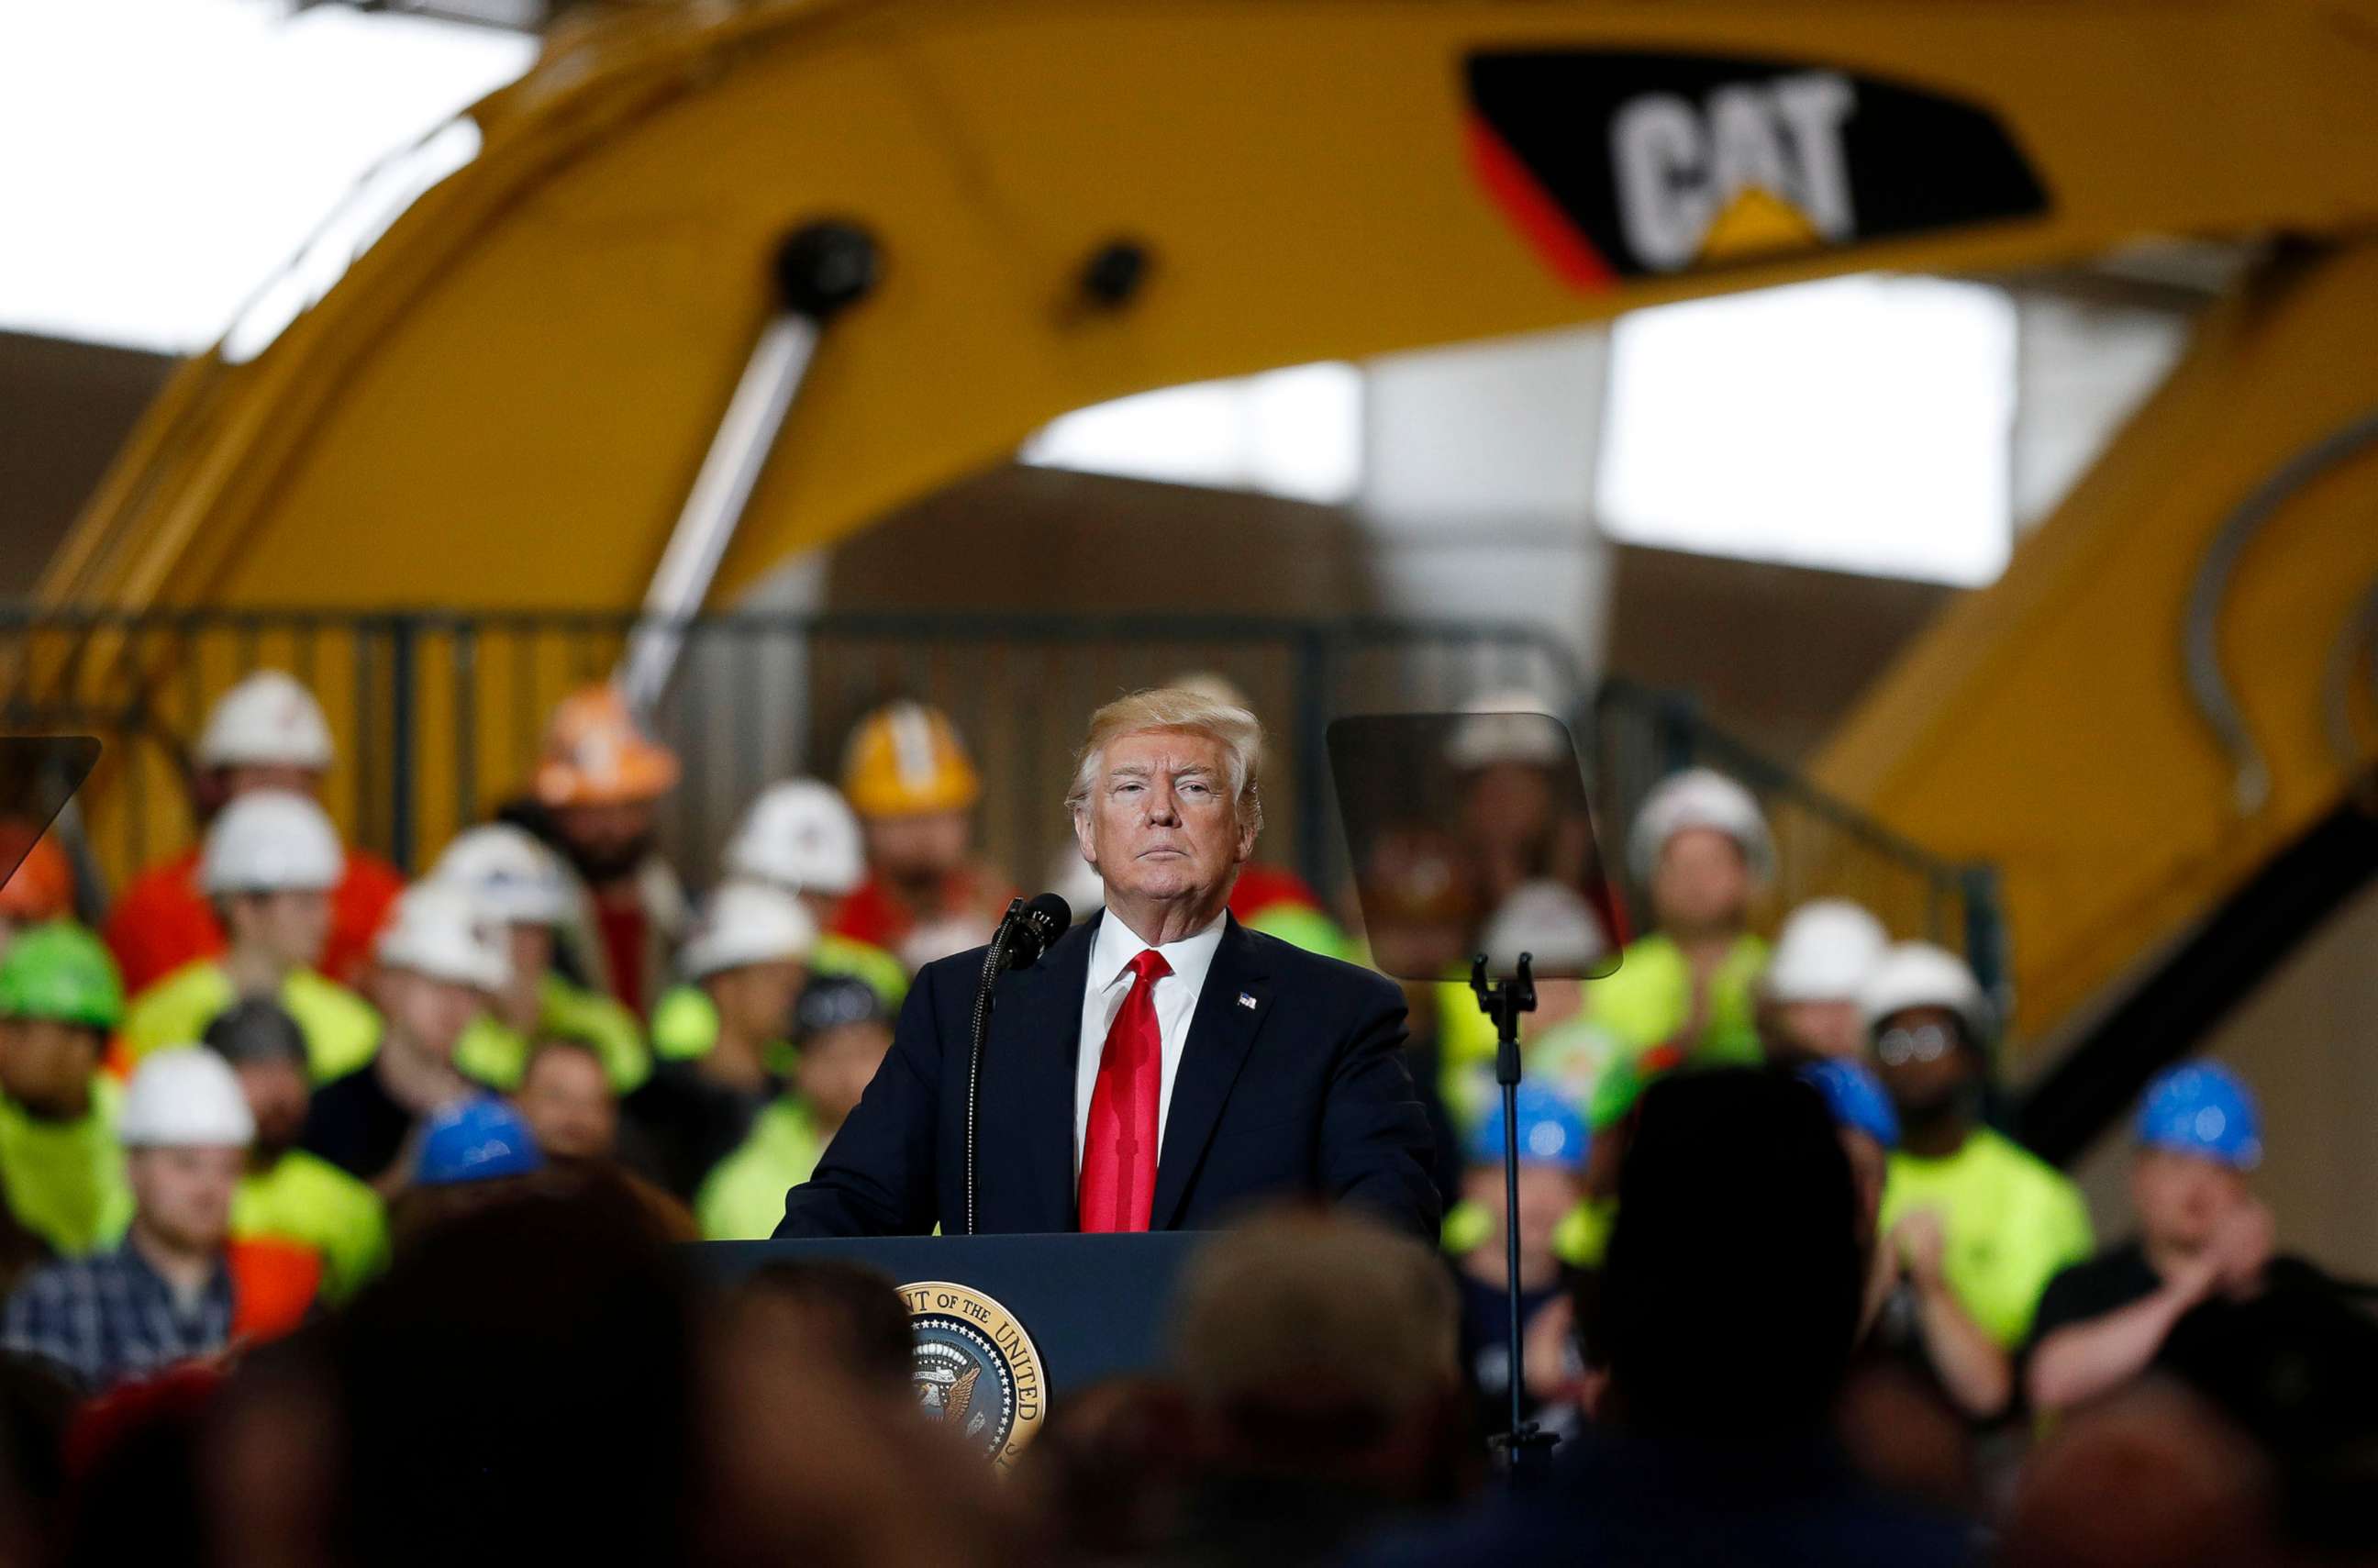 PHOTO: President Donald Trump speaks about his infrastructure plan during a visit to Local 18 Richfield Training Facility in Richfield, Ohio, on March 29, 2018.